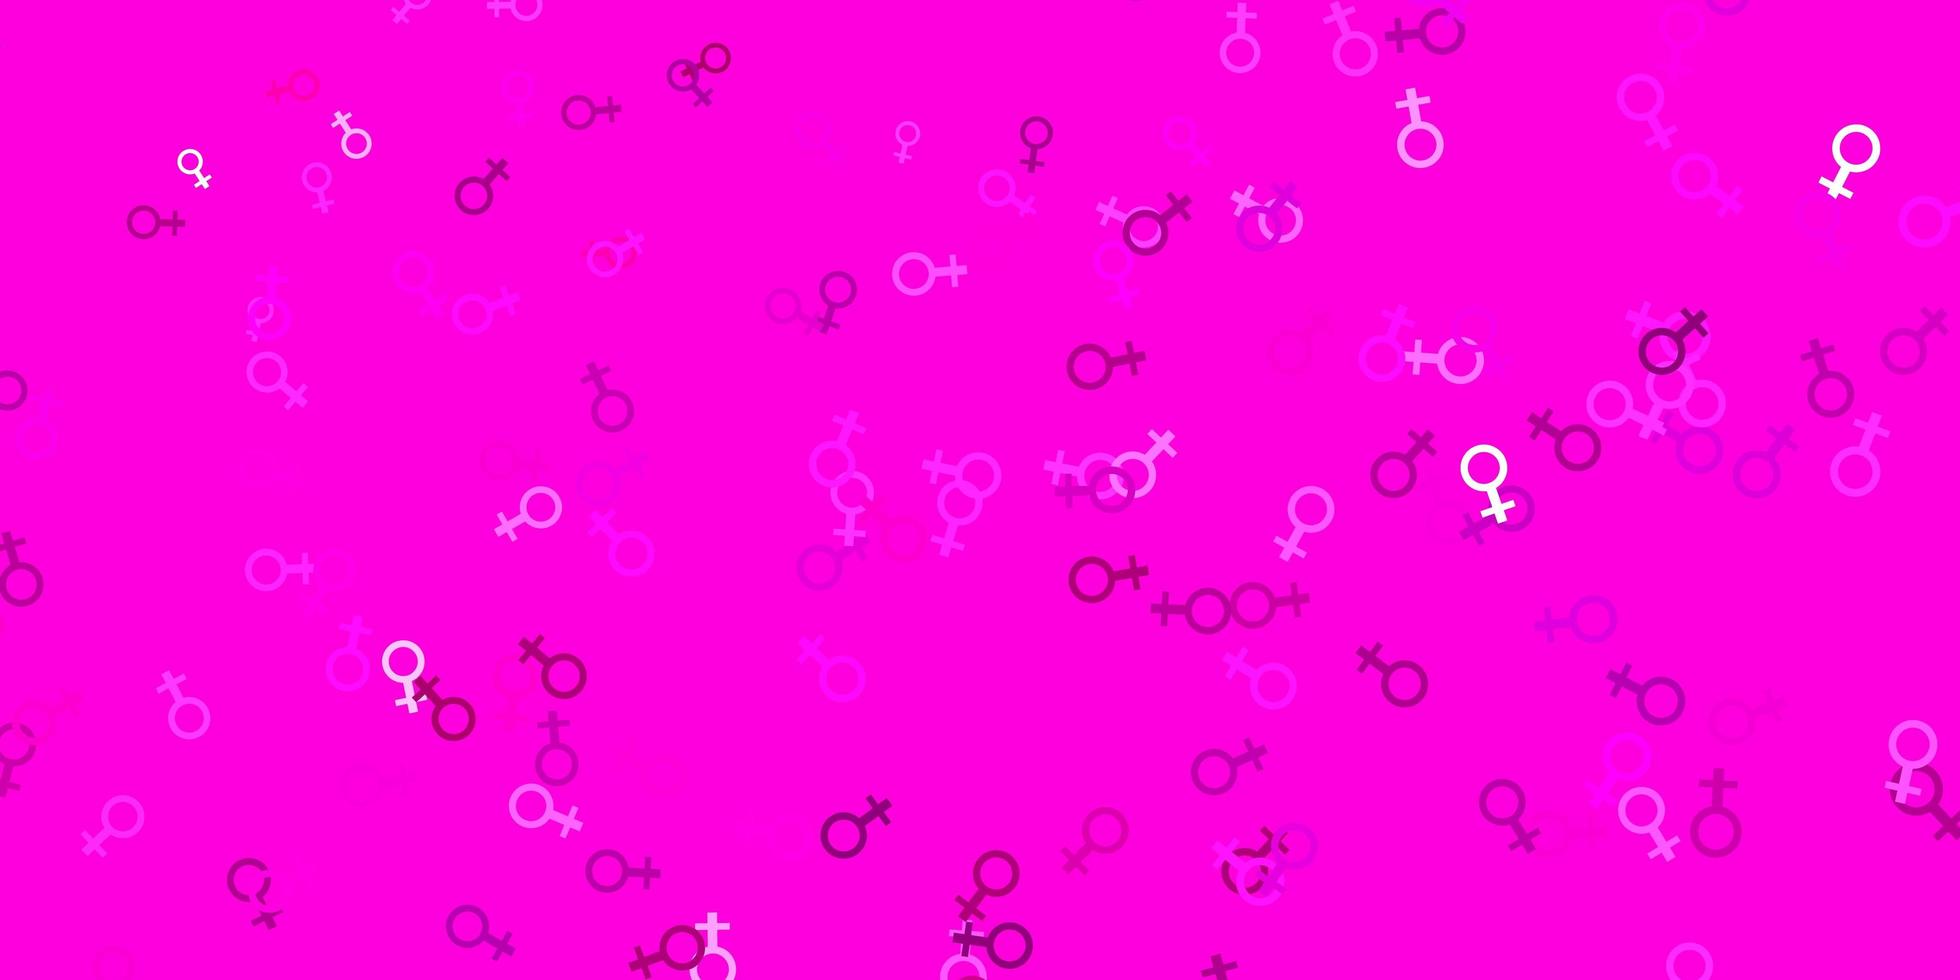 Light Pink vector background with woman symbols.